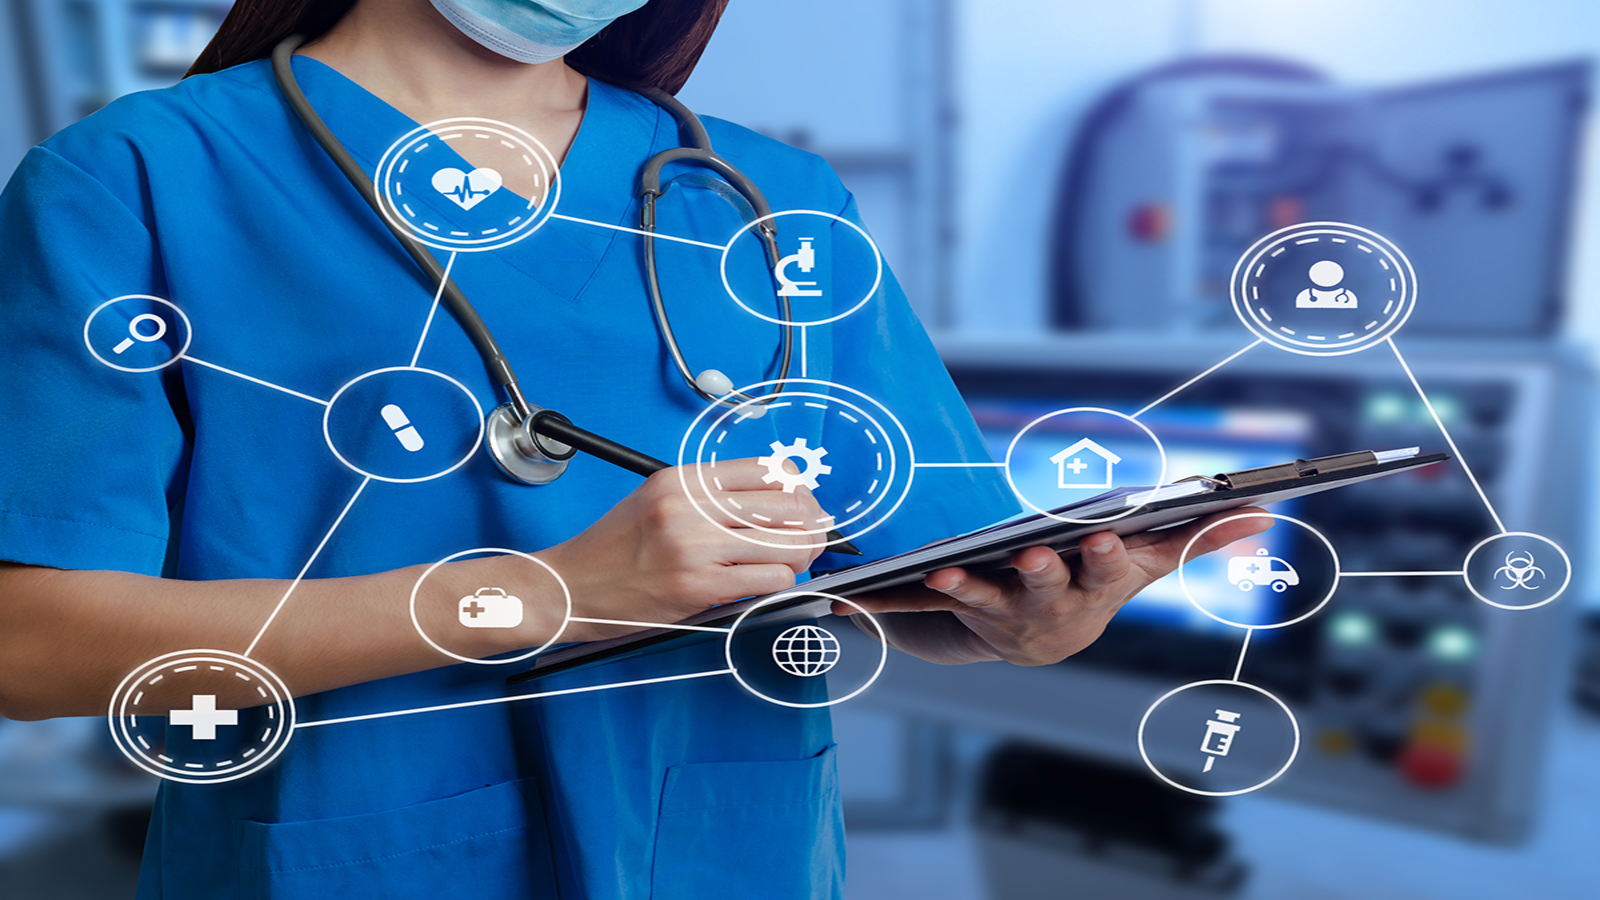 Healthcare MSO Market Size, Industry Trends, Growth Analysis and Forecast to 2027